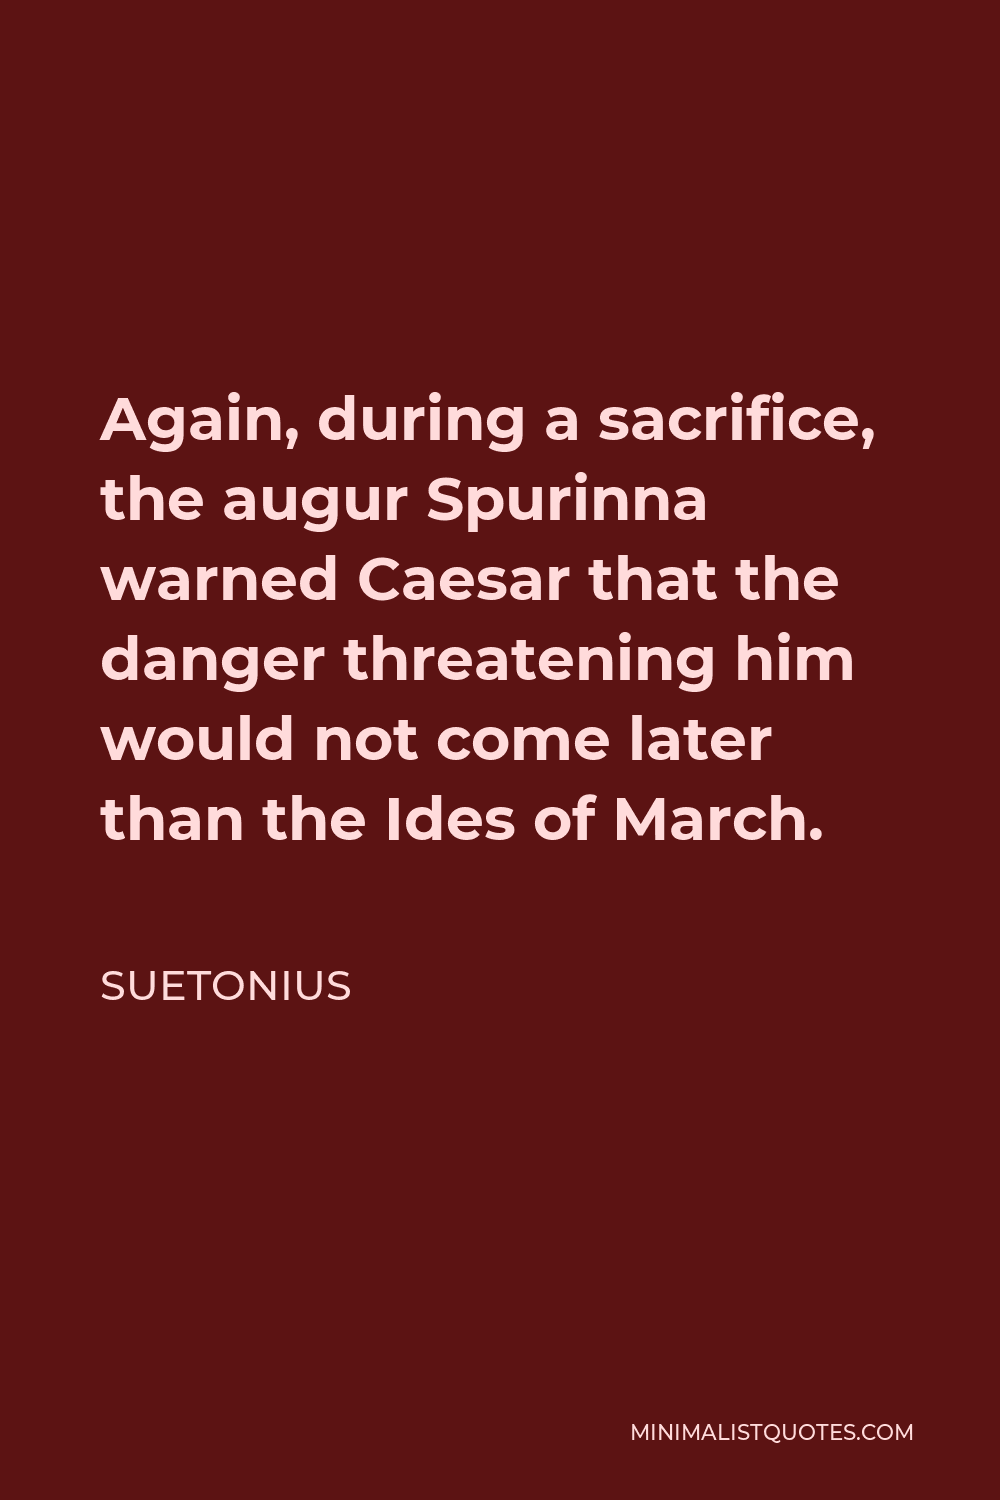 Suetonius Quote - Again, during a sacrifice, the augur Spurinna warned Caesar that the danger threatening him would not come later than the Ides of March.